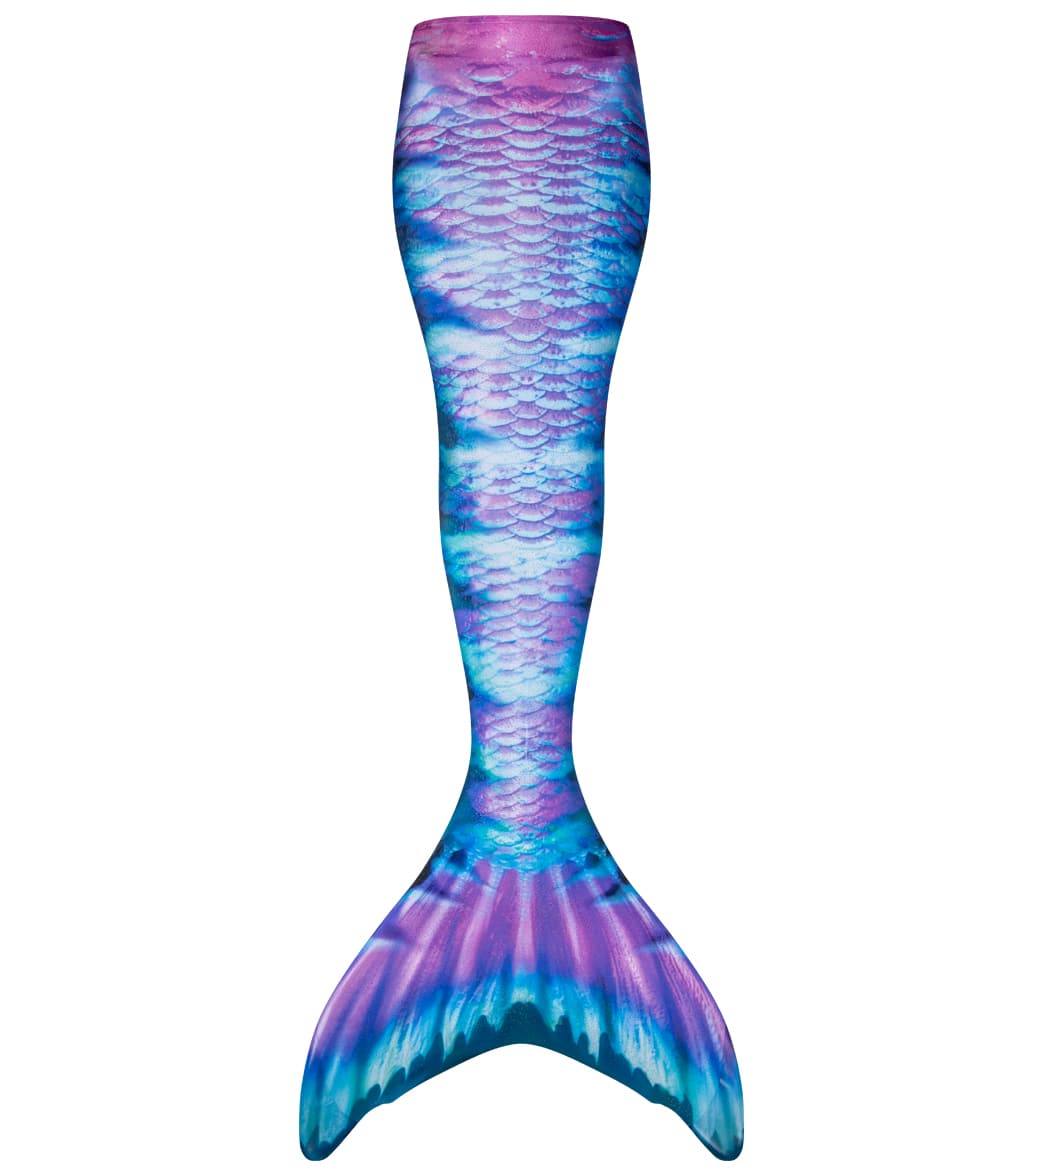 Fin Fun Moon Dive Mermaid Tail & Monofin Youth/Adult - Youth Large 10 - Swimoutlet.com